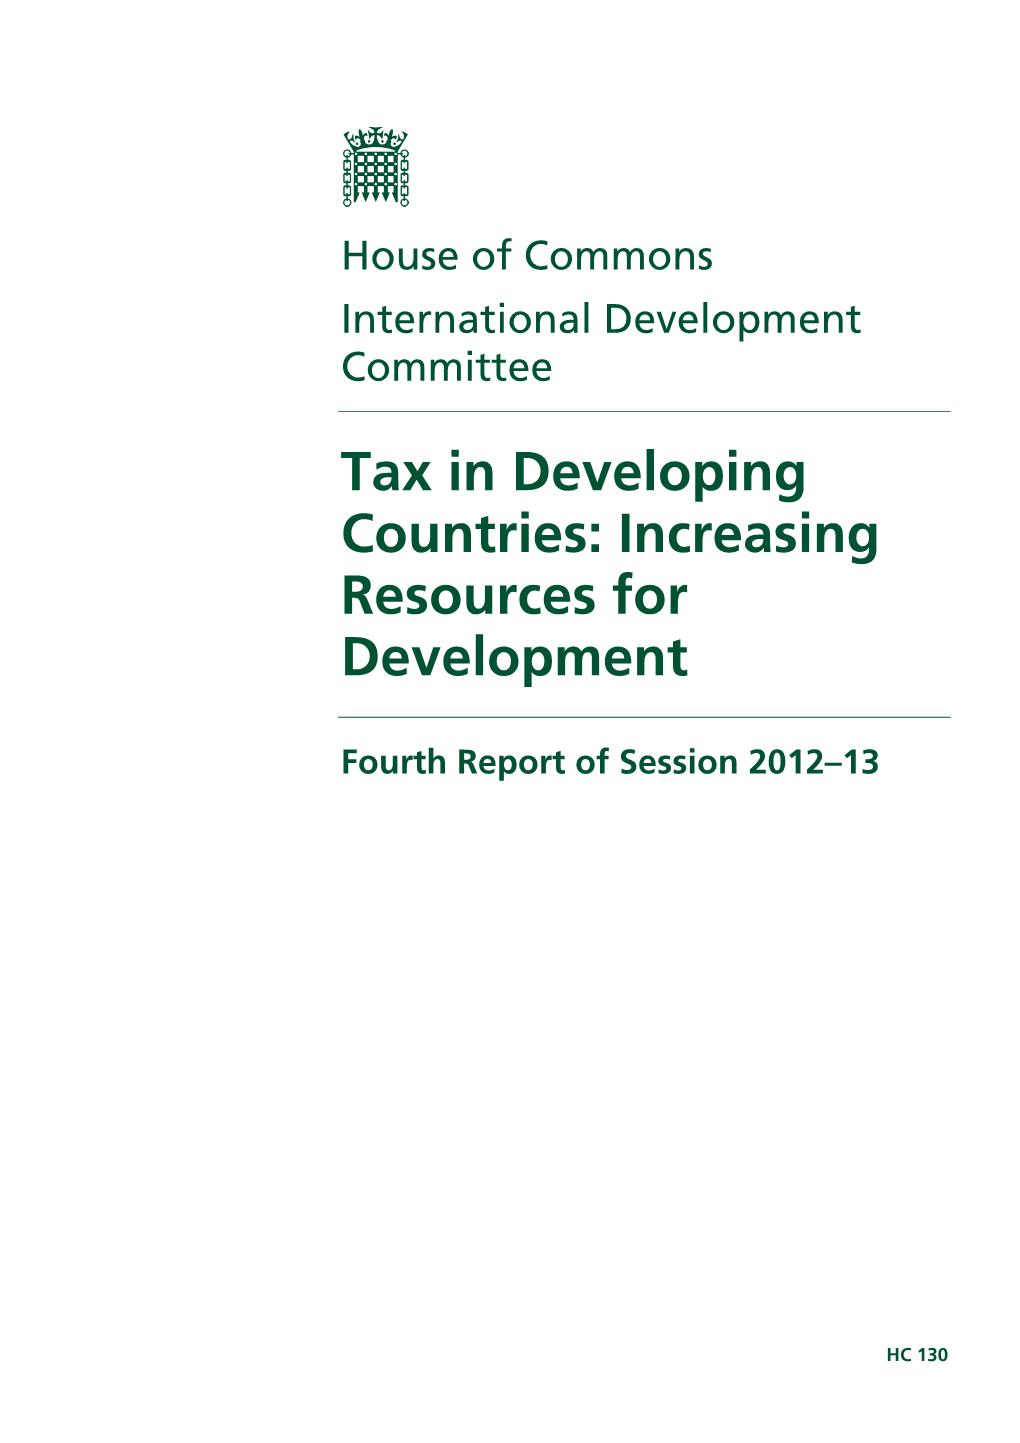 Tax in Developing Countries: Increasing Resources for Development